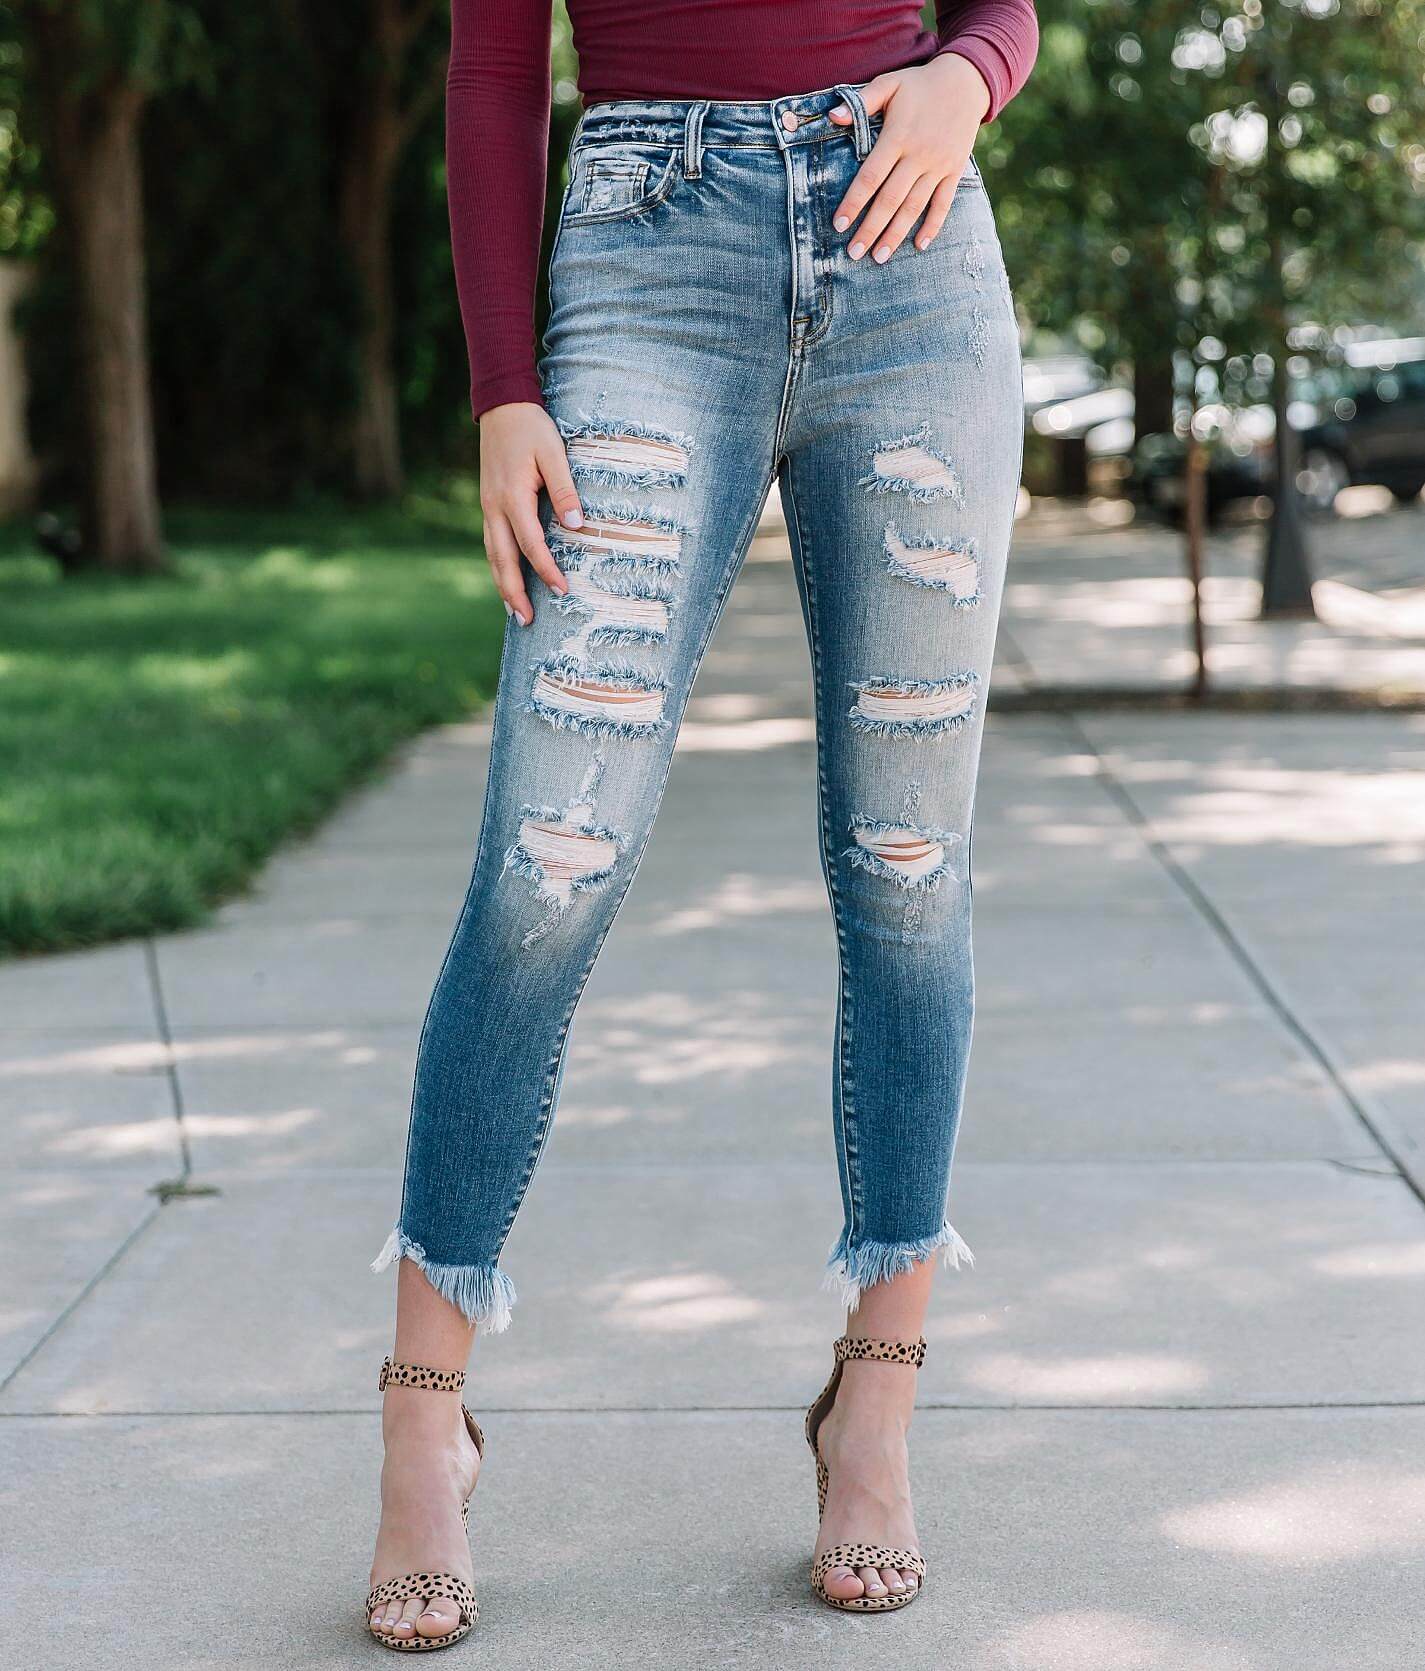 above the ankle jeans